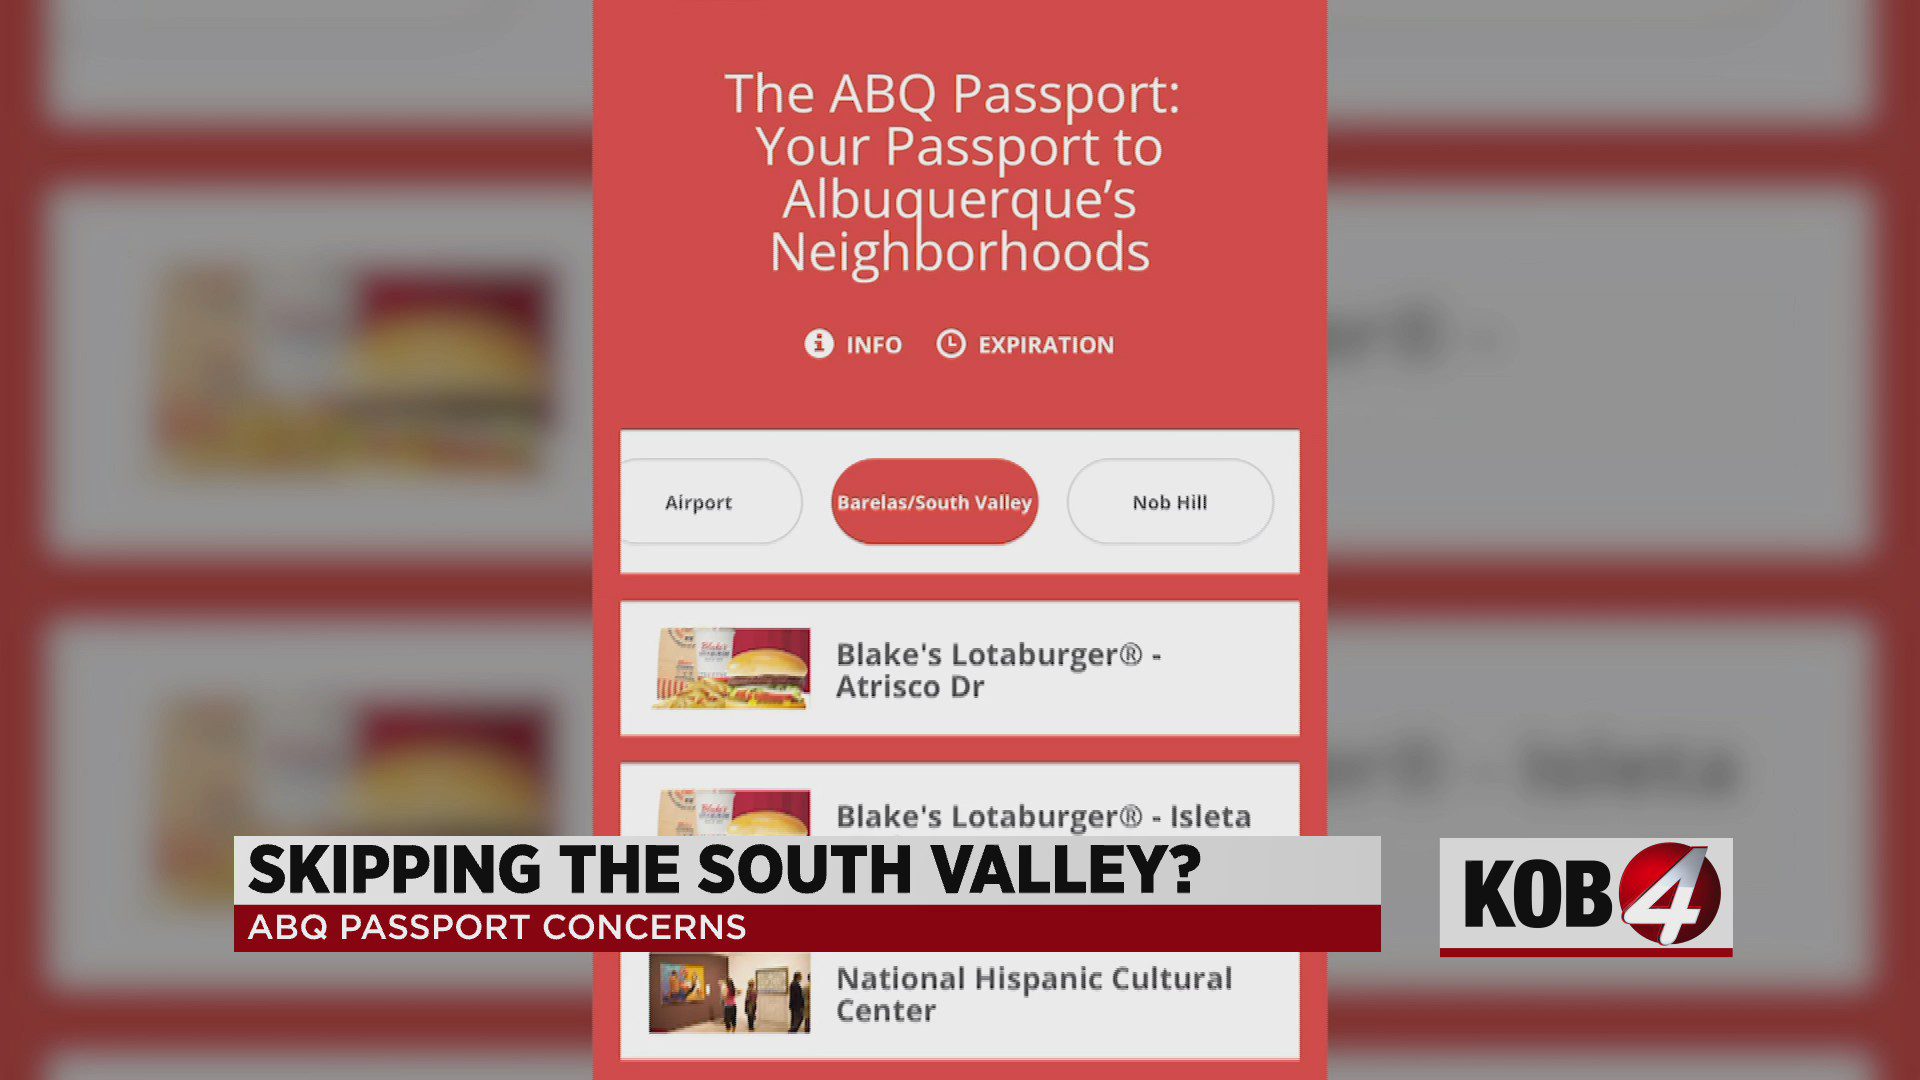 Did ABQ Passport skip the South Valley?